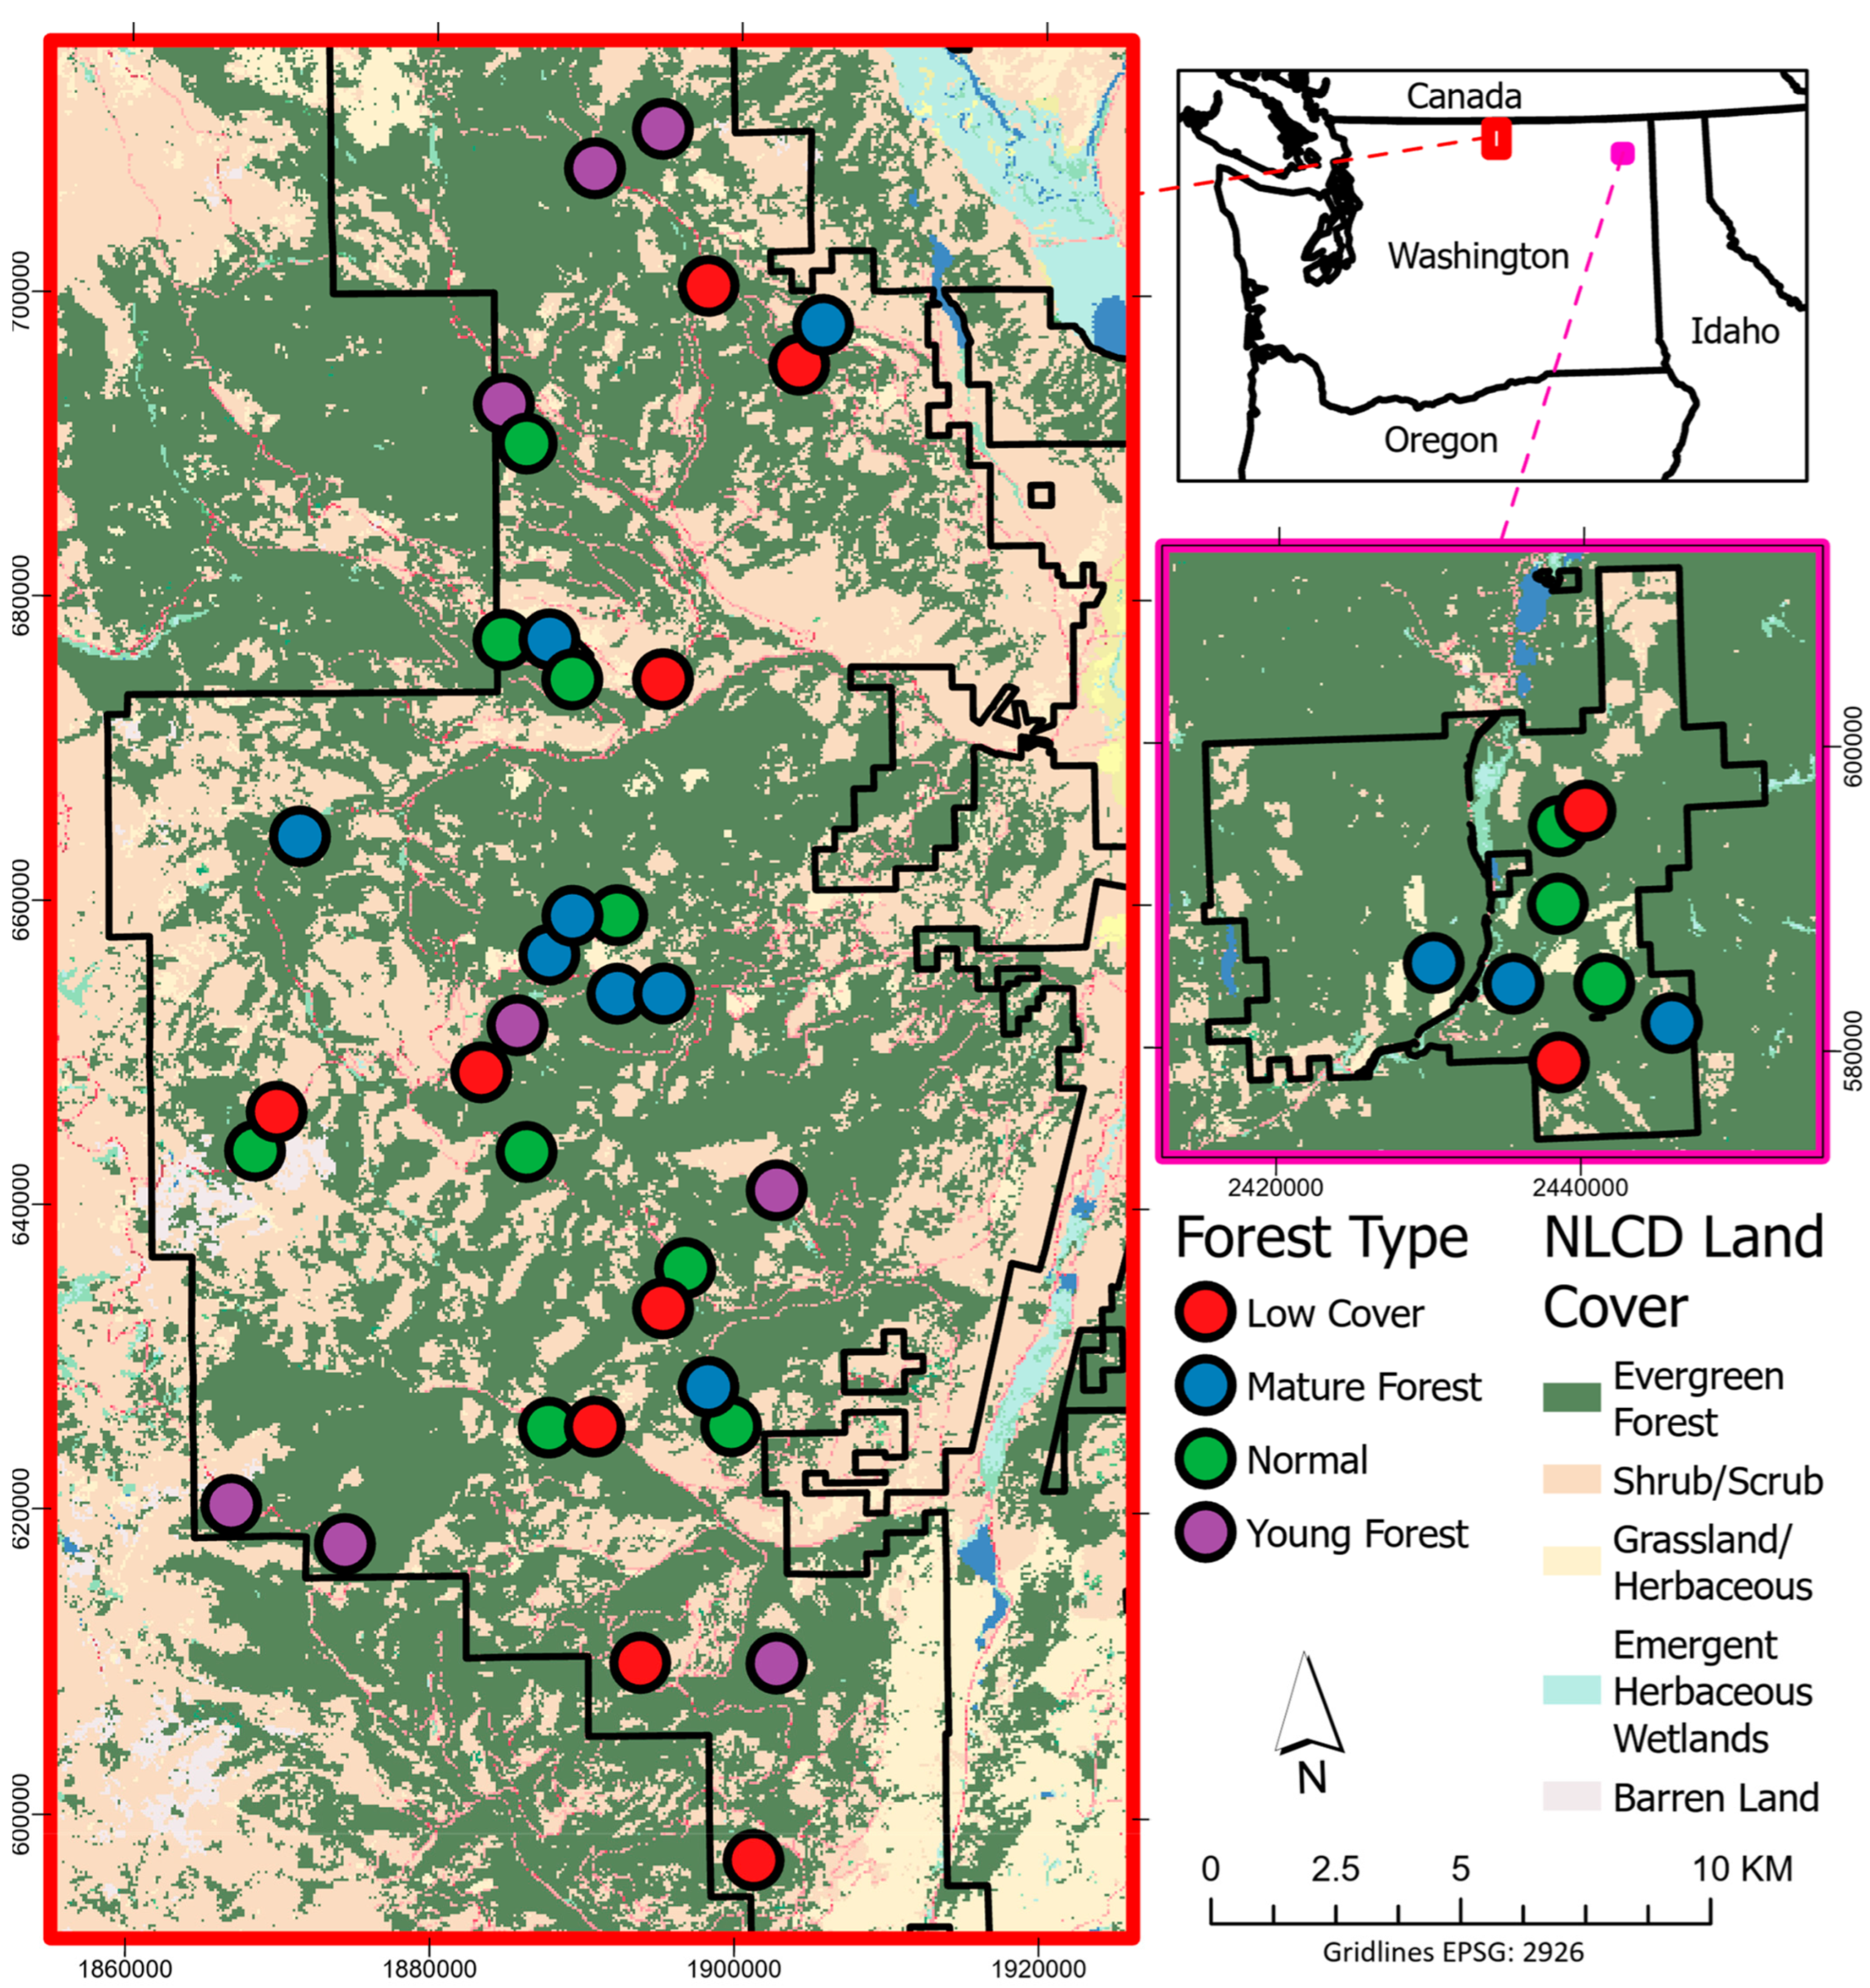 Remote Sensing | Free Full-Text | Terrestrial and Airborne Lidar to  Quantify Shrub Cover for Canada Lynx (Lynx canadensis) Habitat Using  Machine Learning